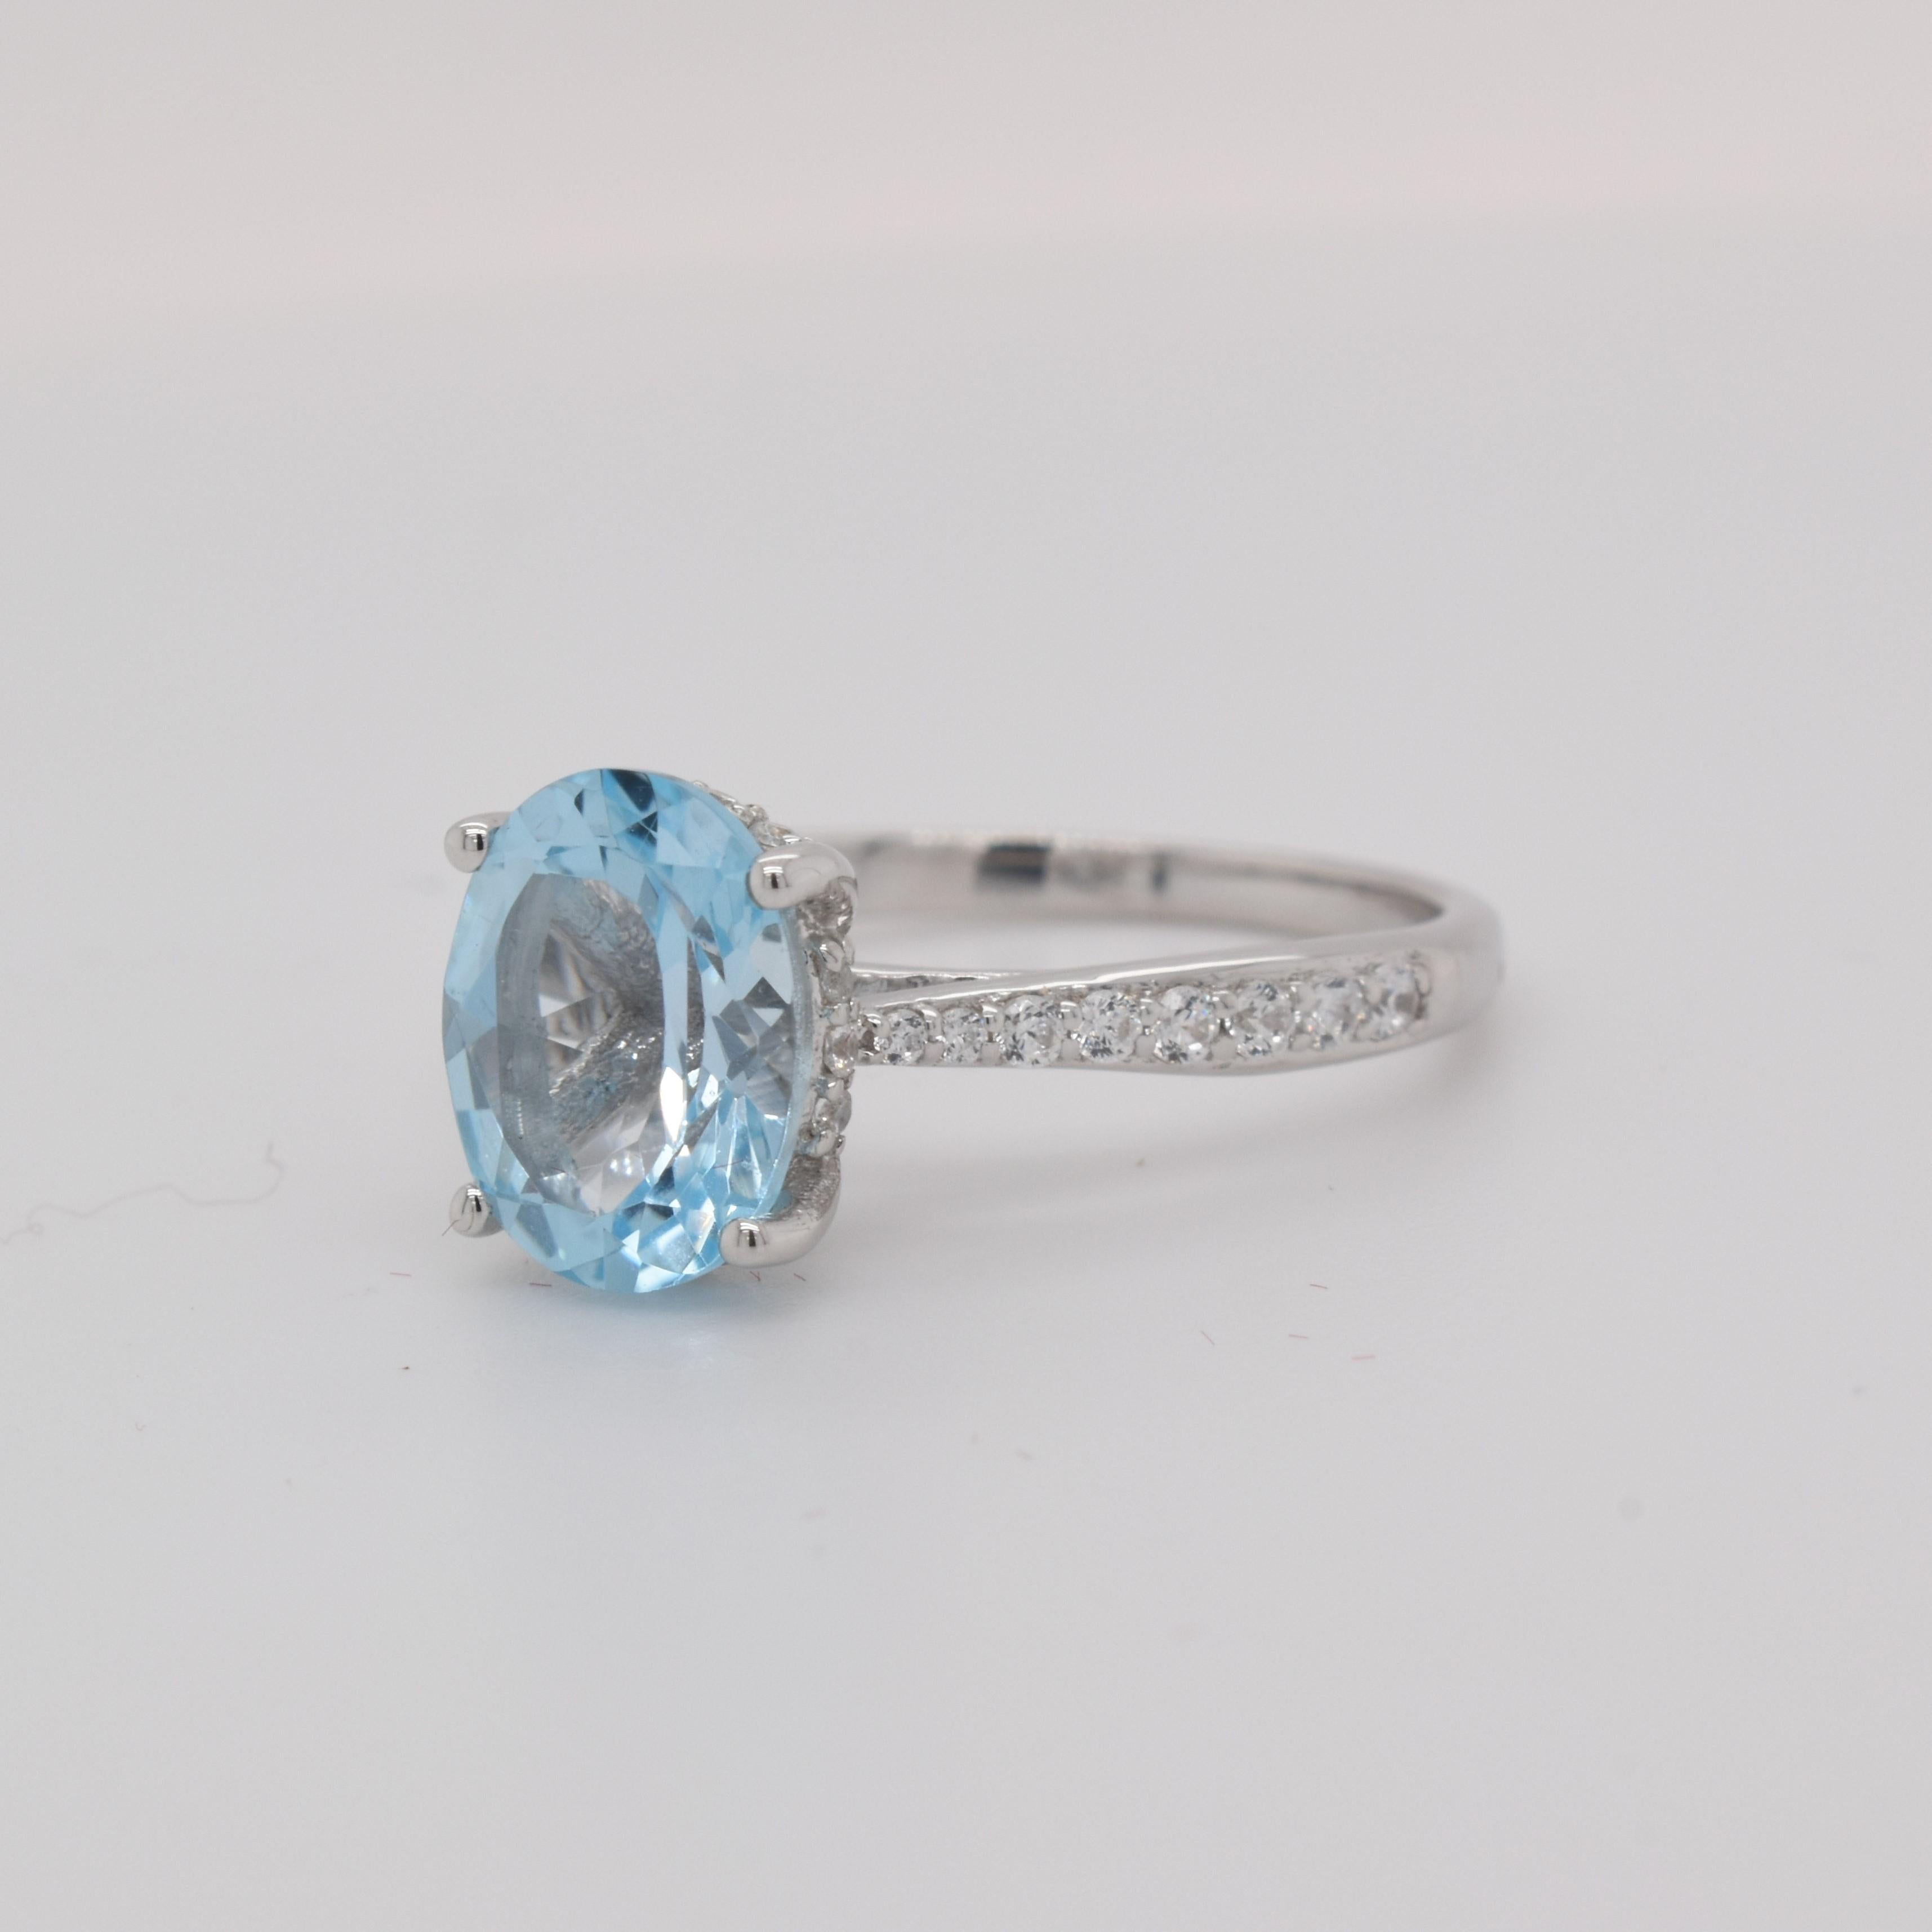 Oval Shape Sky Blue Topaz Gemstone beautifully crafted with CZ in a Ring. A fiery Blue color December Birthstone. For a special occasion like Engagement or Proposal or may be as a gift for a special person.

Primary Stone Size - 9x7mm